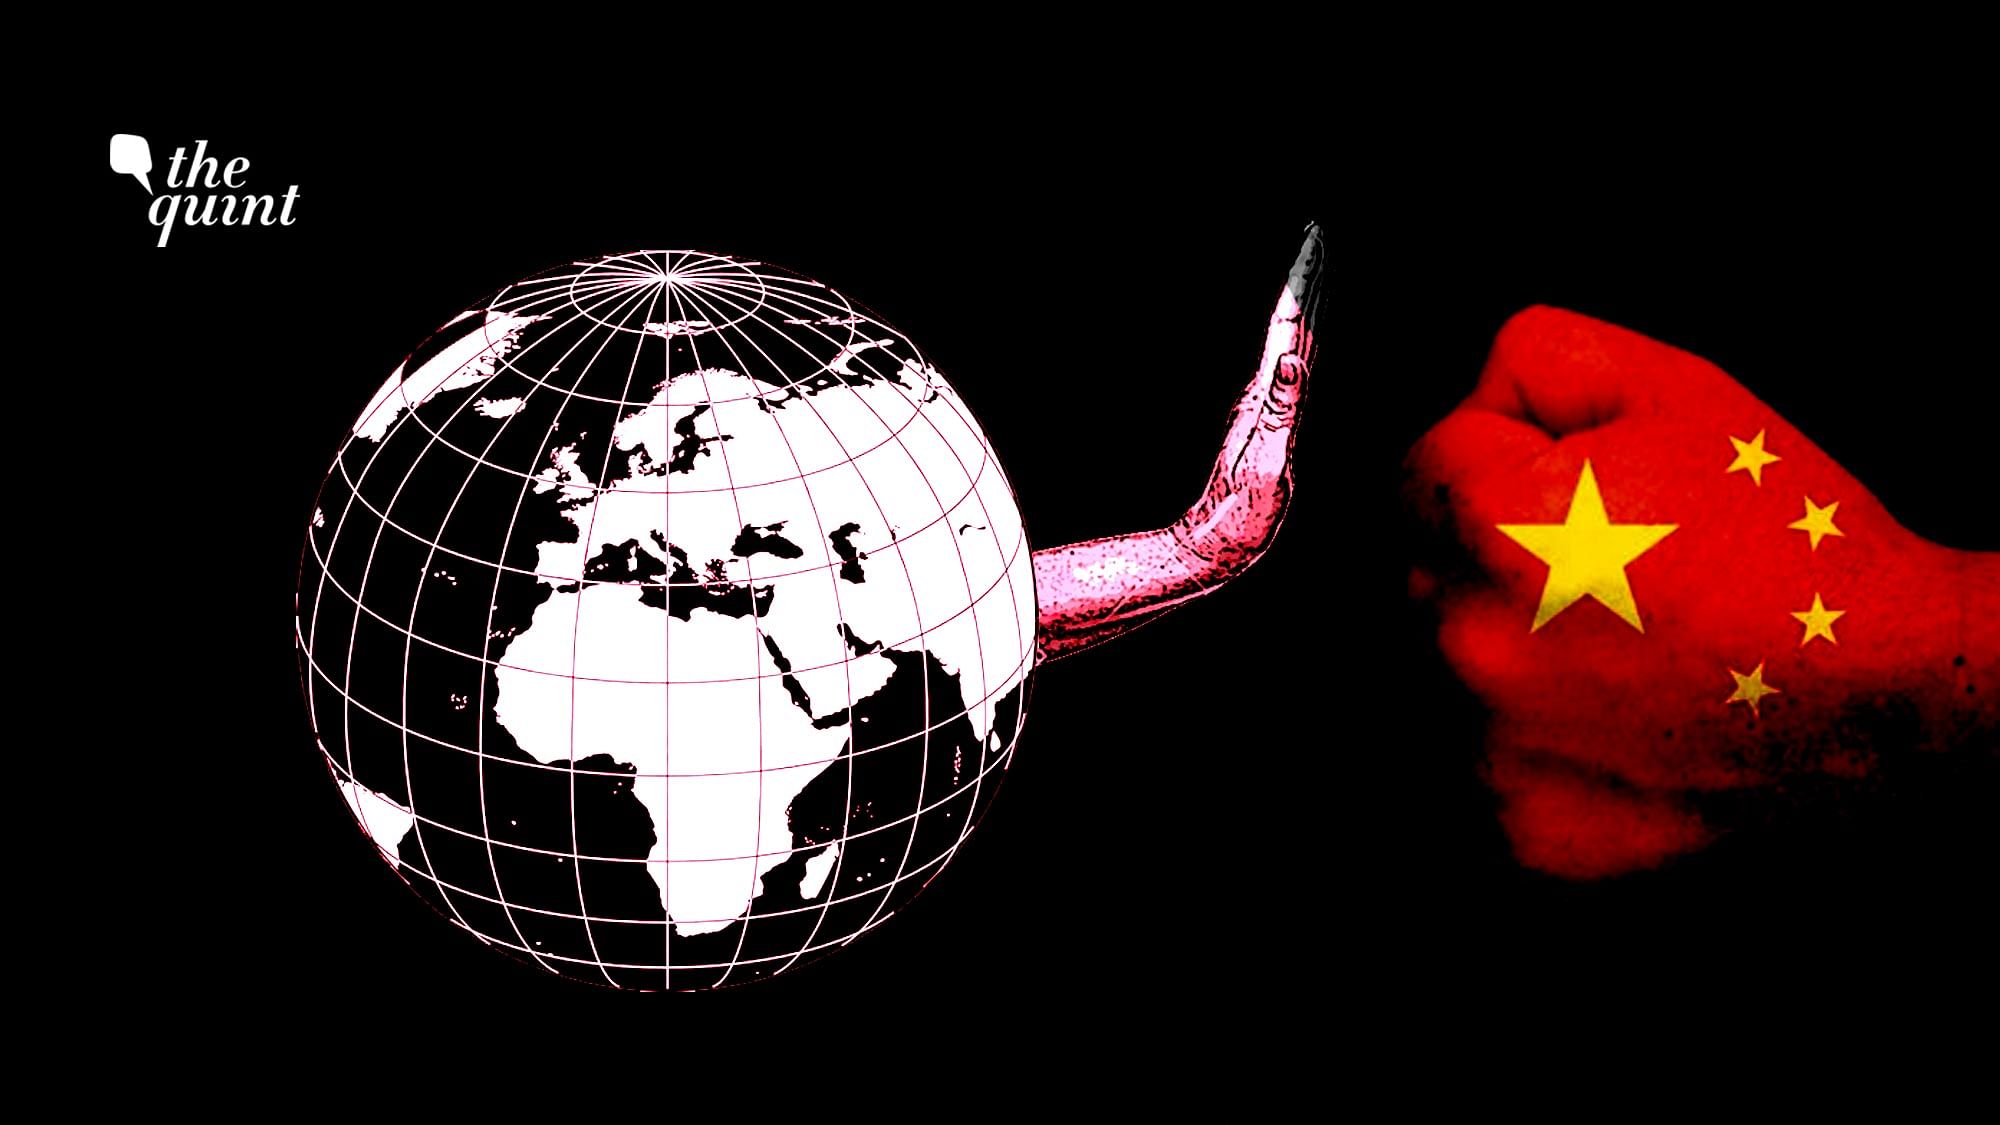 Image of globe (to represent the world) and artistic impression of the Chinese flag used for representational purposes.